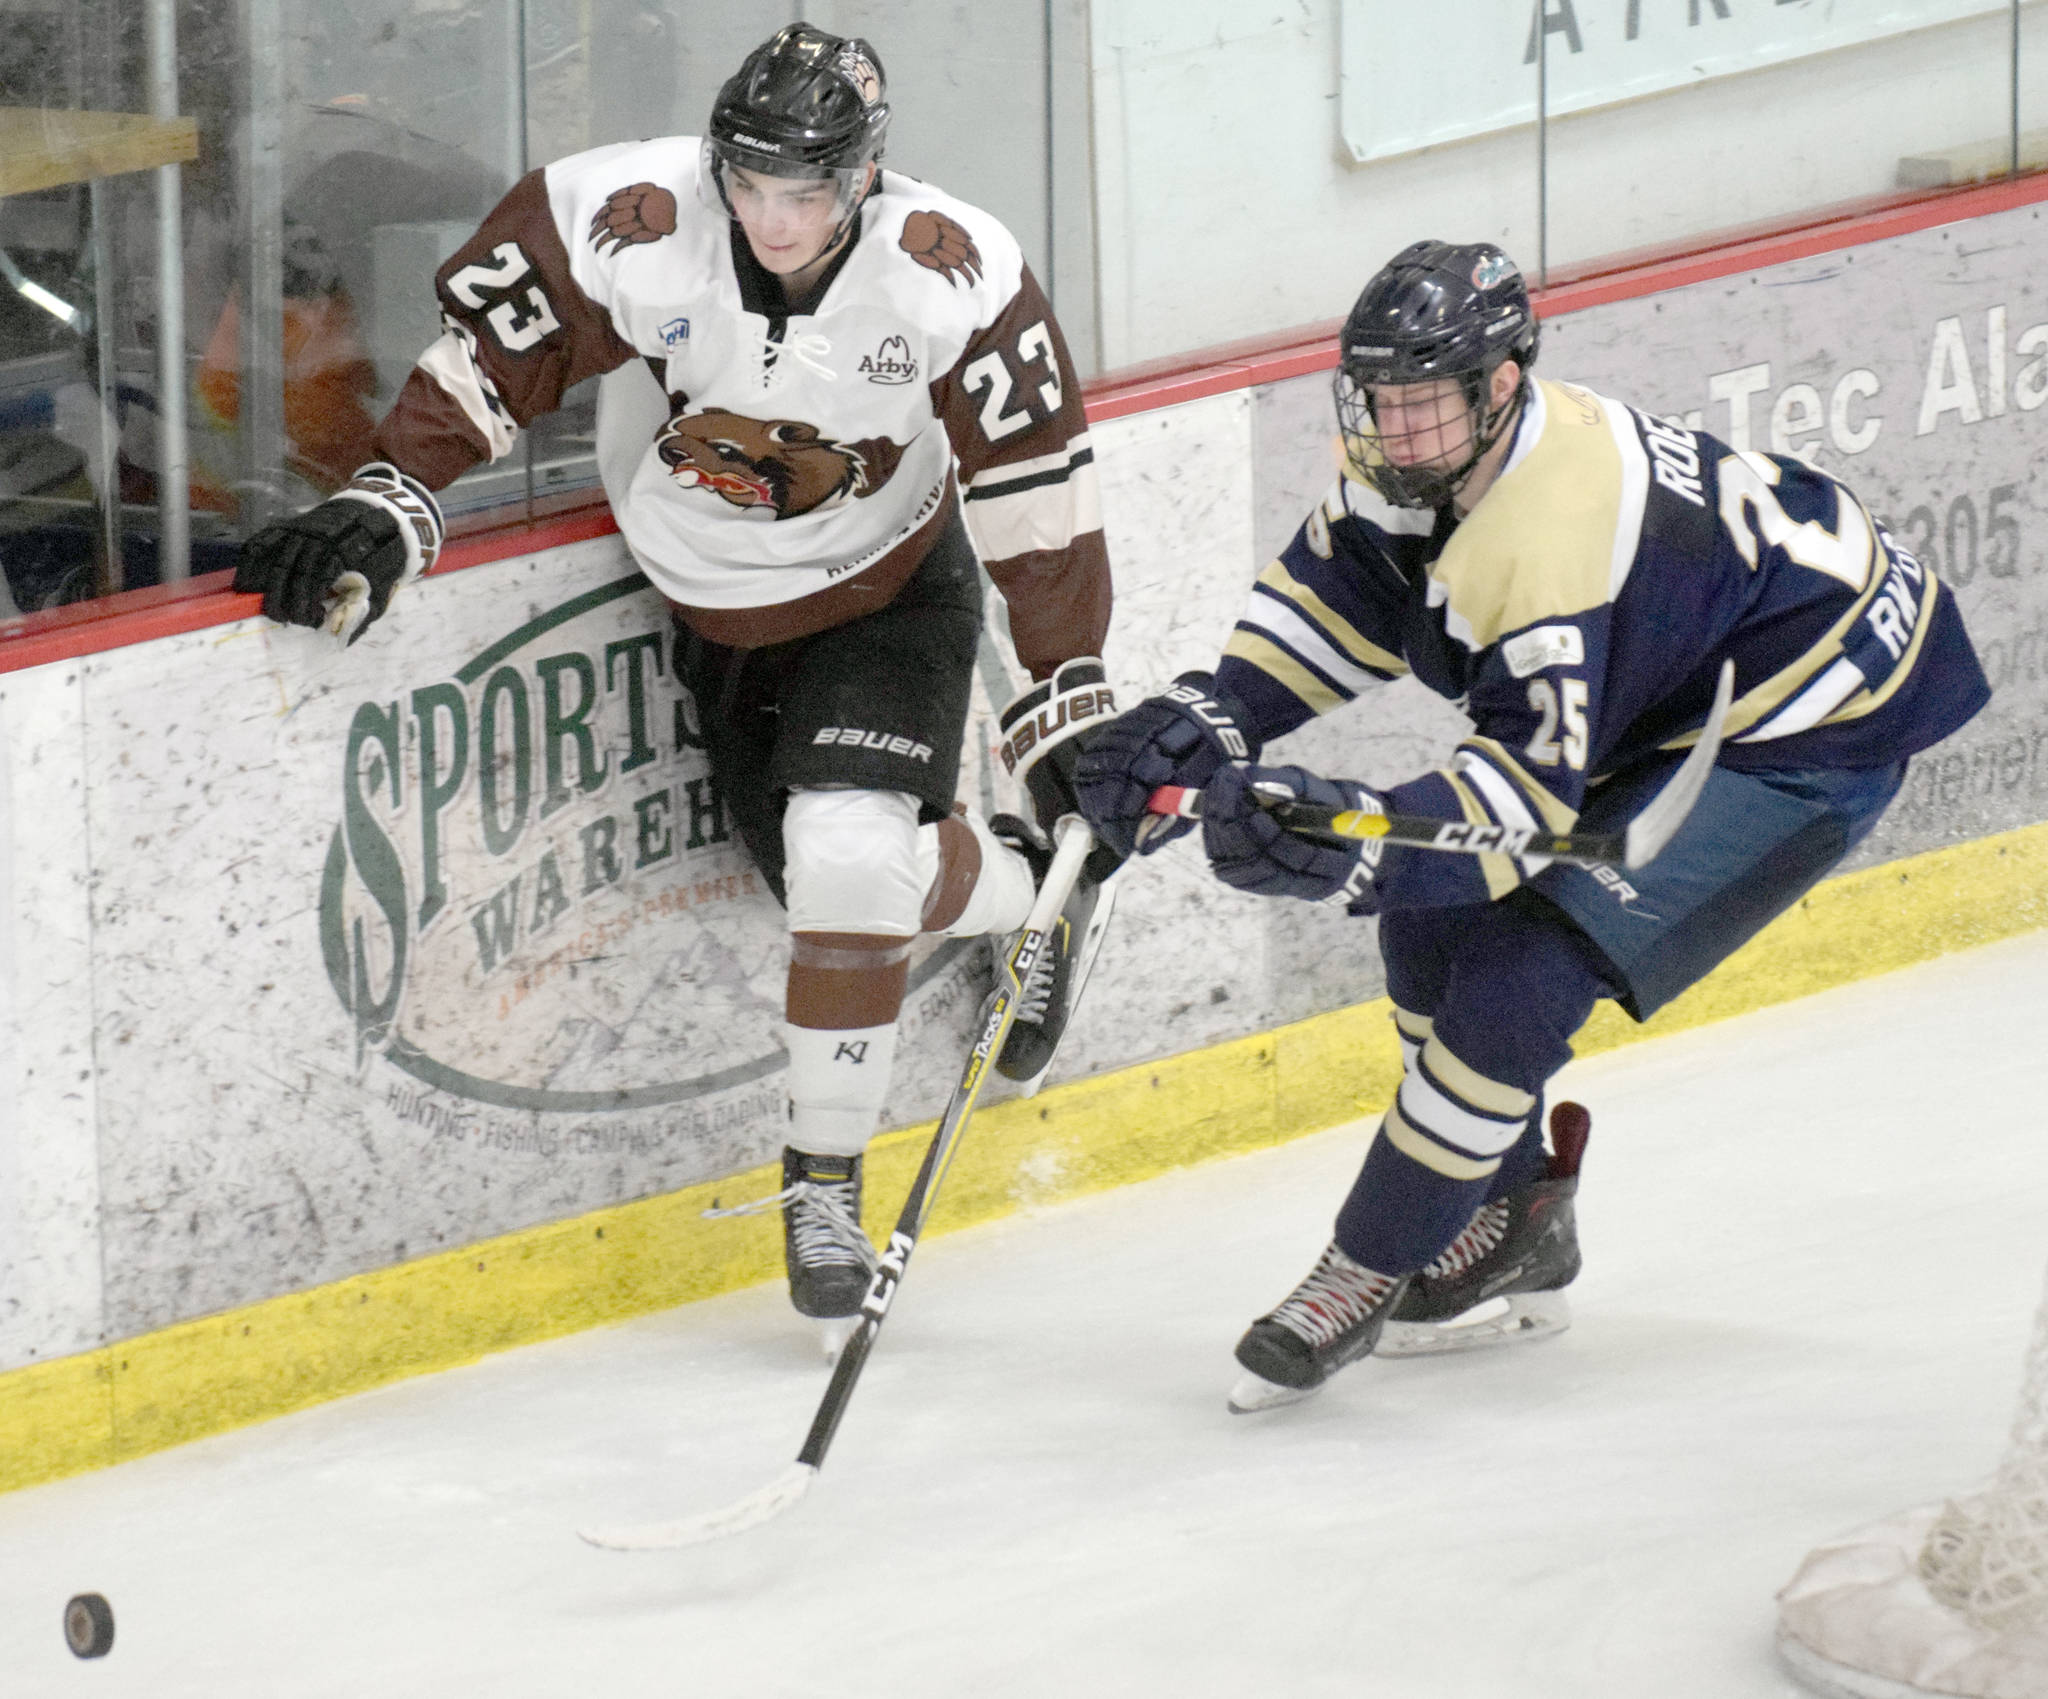 Kenai River Brown Bears defenseman Max Helgeson and Janesville (Wisconsin) Jets defenseman Casey Roepke battle for the puck Friday, Dec. 6, 2019, at the Soldotna Regional Sports Complex in Soldotna, Alaska. (Photo by Jeff Helminiak/Peninsula Clarion)